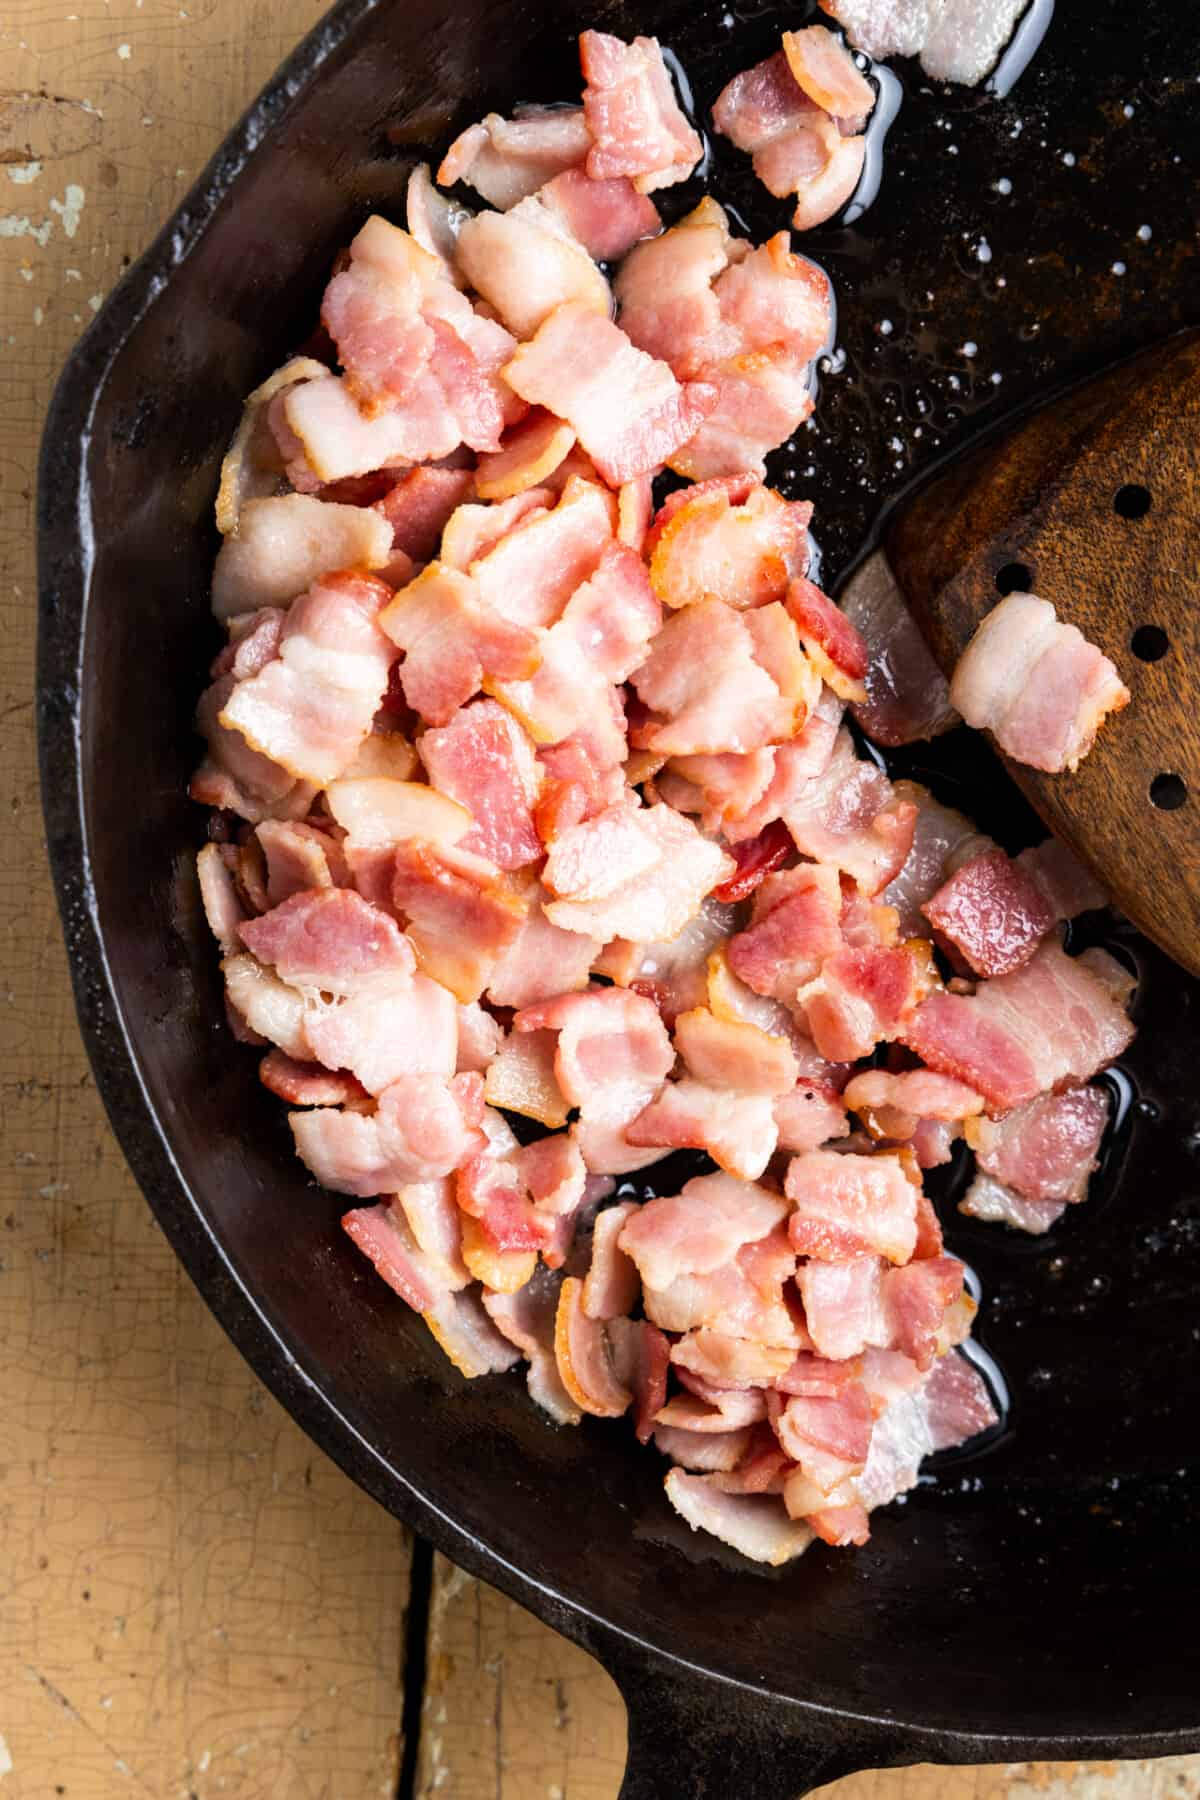 Bacon being cooked to render fat in a skillet.